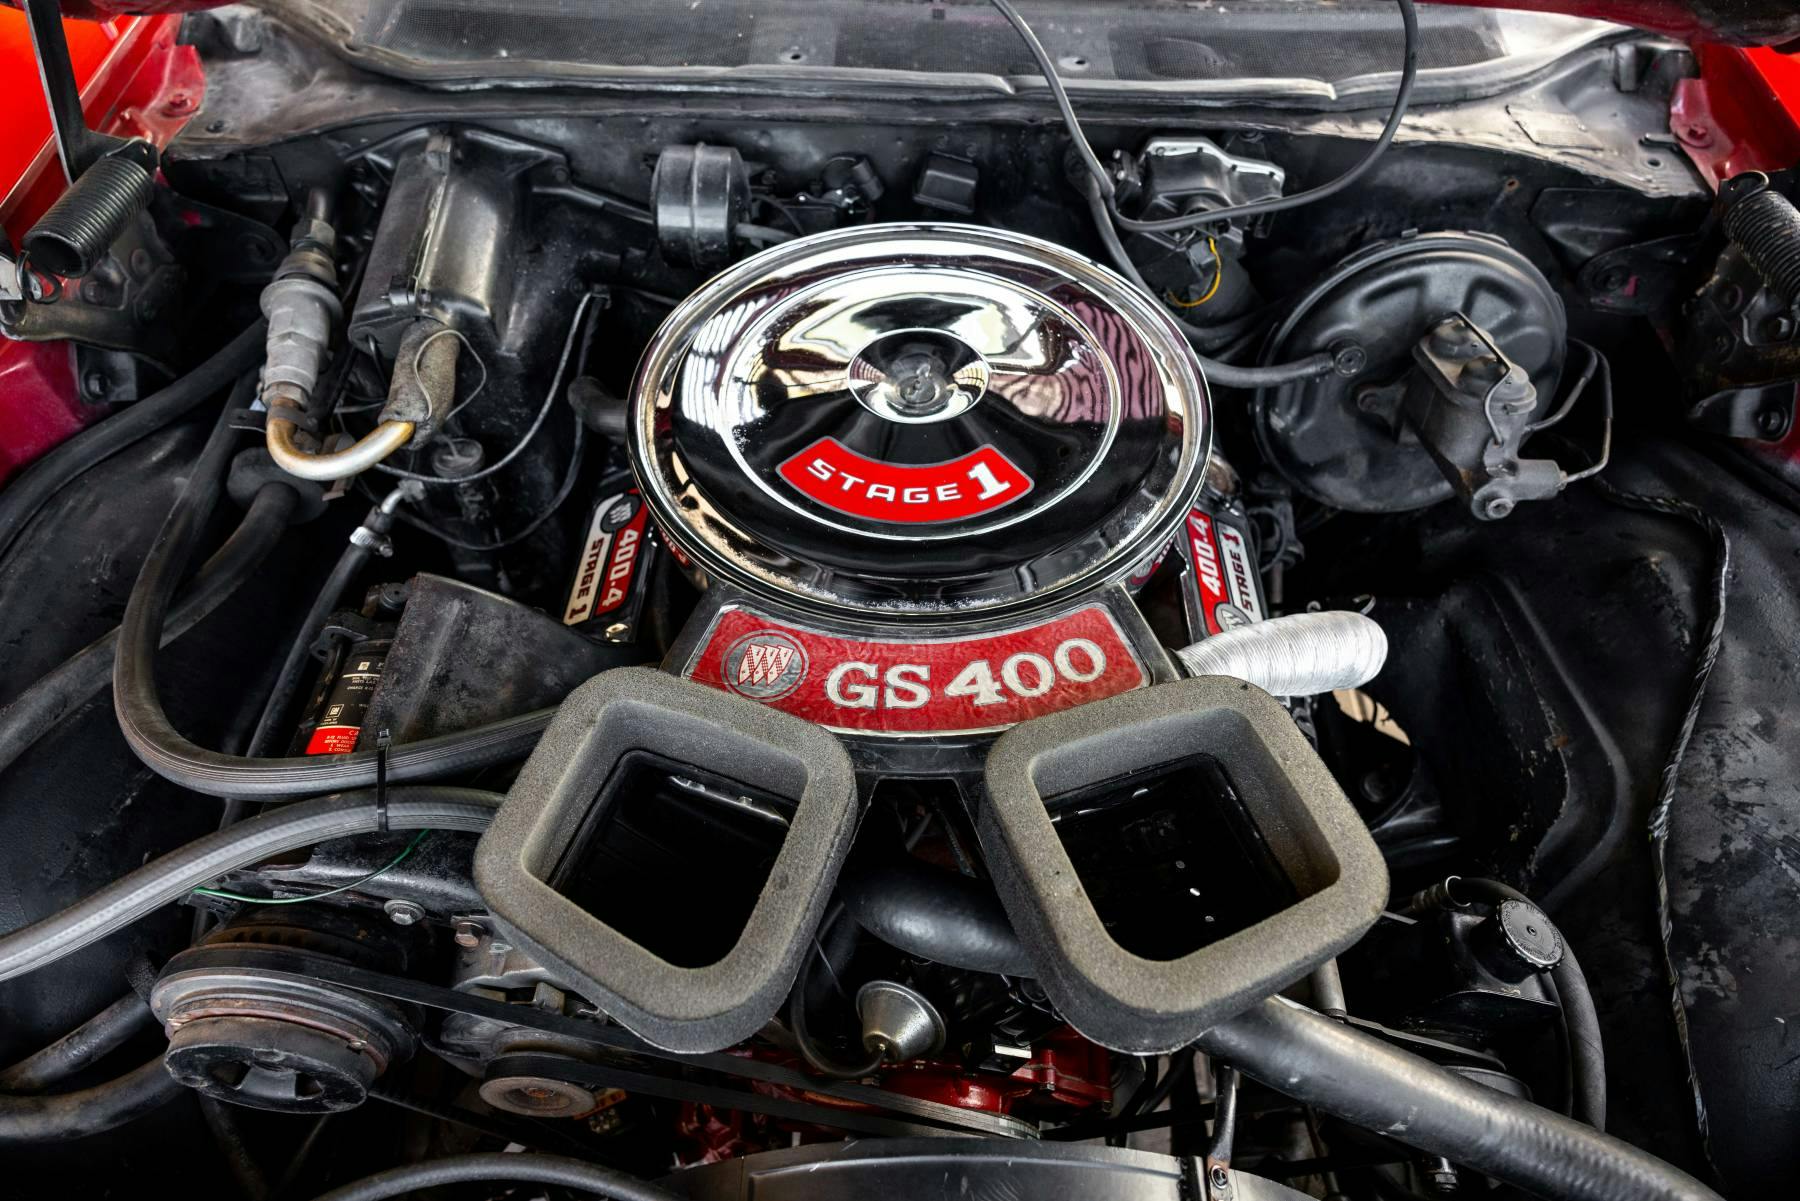 1969 Buick GS400 Convertible Stage 1 engine